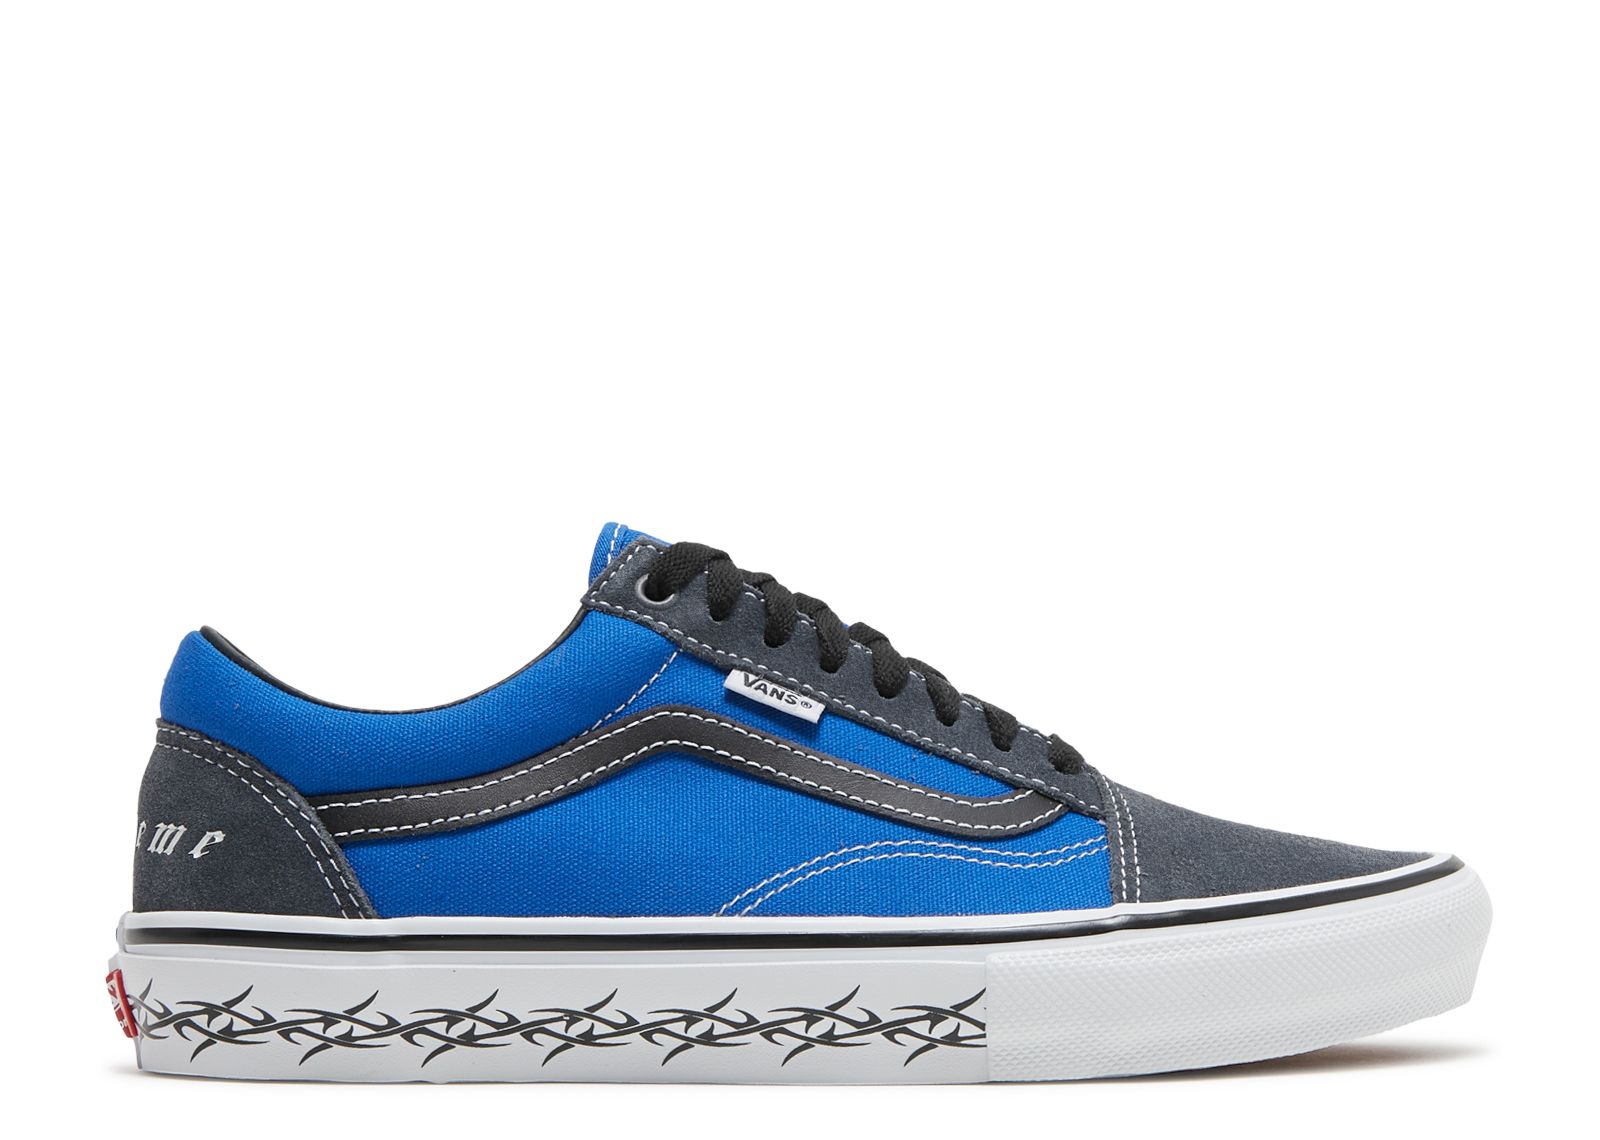 Кроссовки Vans Supreme X Old Skool 'Barbed Wire - Royal', синий ce cog 4d barbed suture with l cannula 21g 100mm wire fact lift hilos tensores hskinlift pdo molding fishbone mono thread